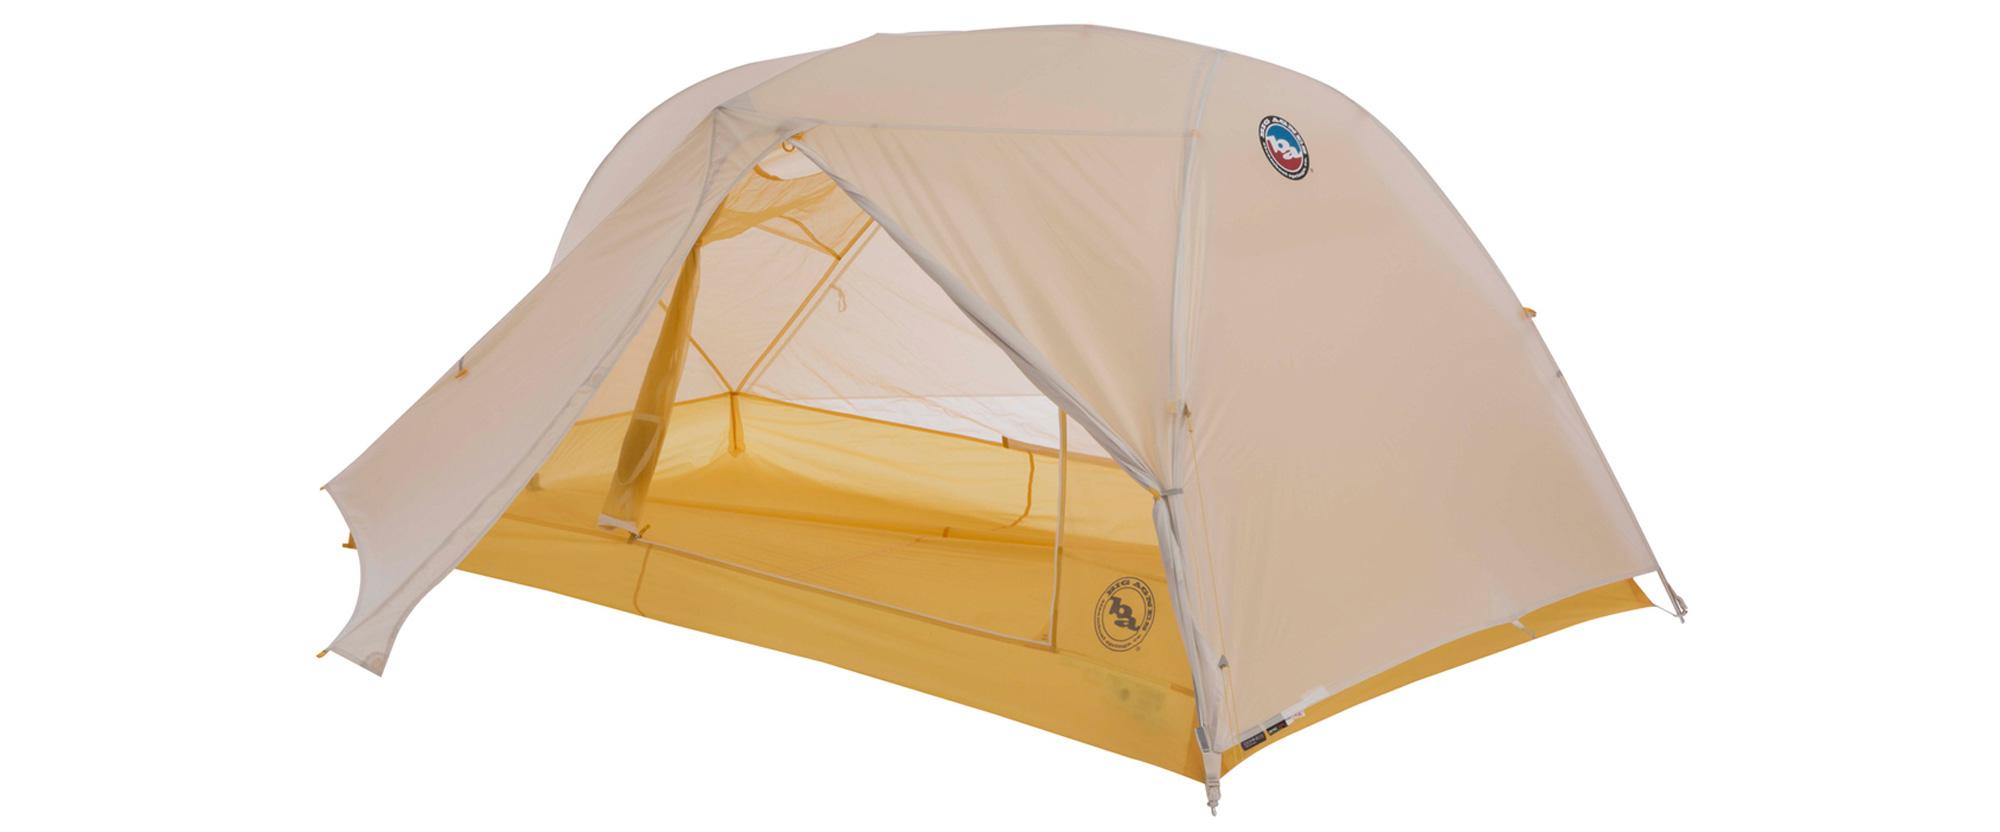 Big Agnes Tiger Wall UL 2 person solution dye tent